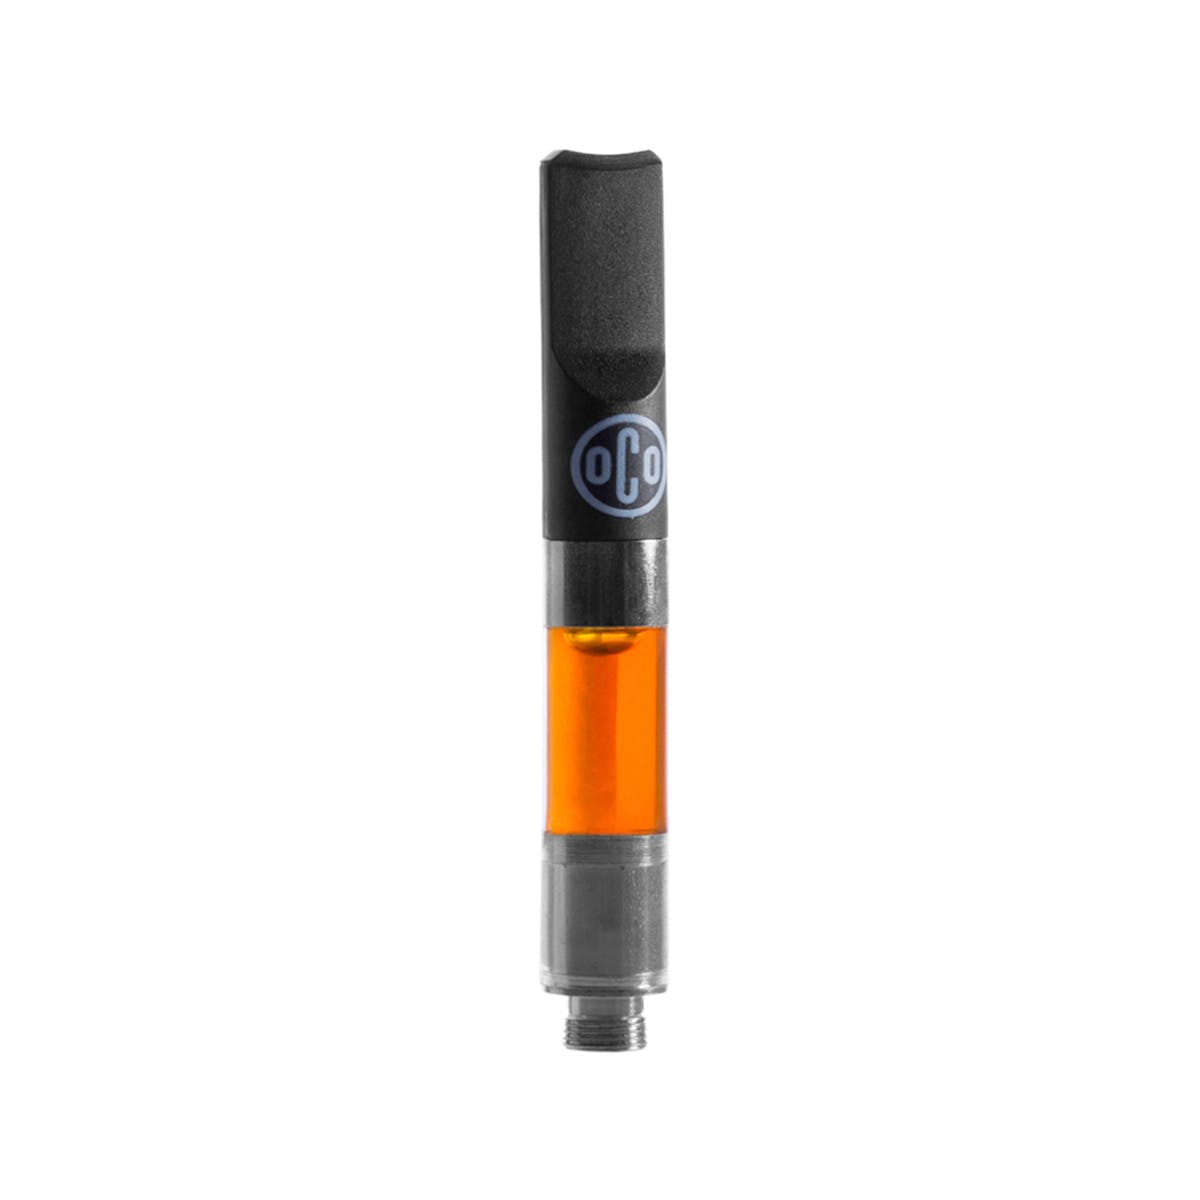 concentrate-oco-fruit-cocktail-cartridge